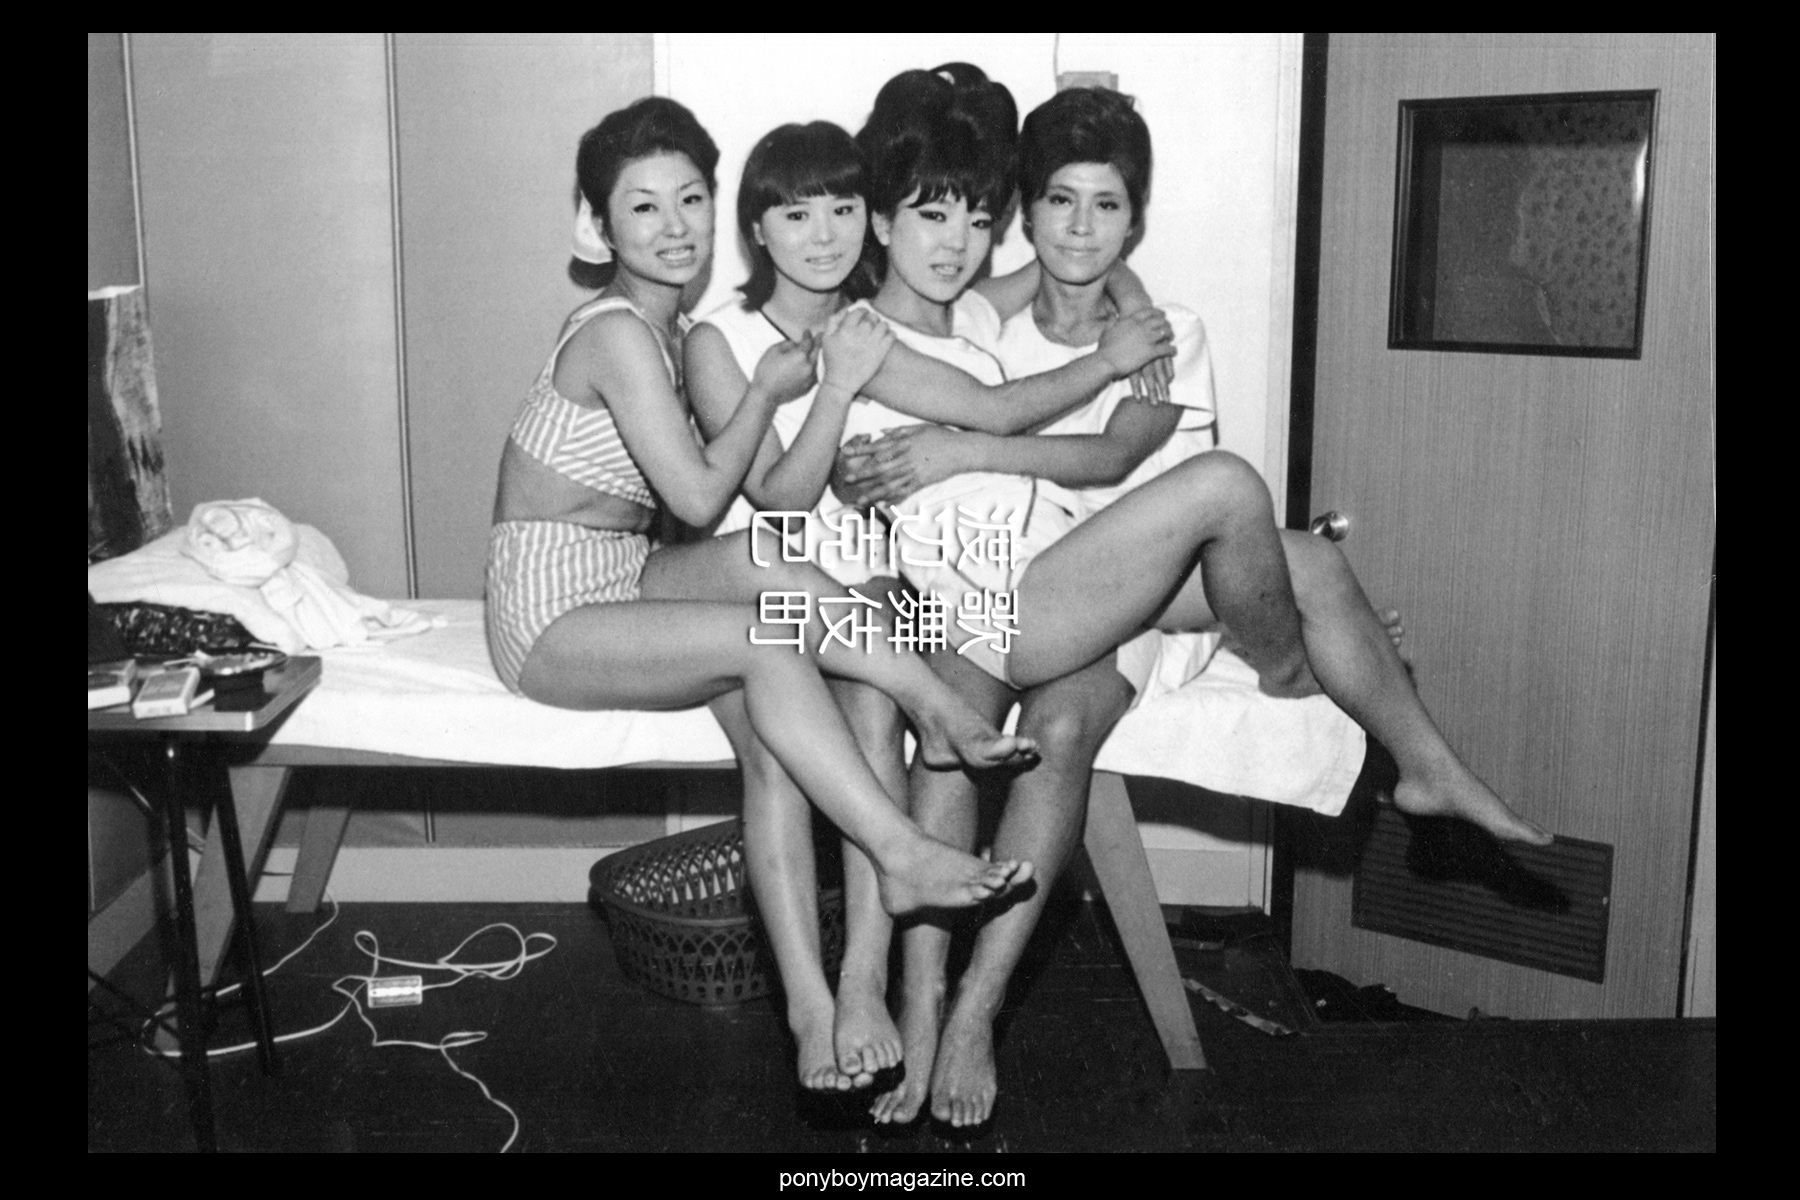 Japanese prostitutes in the 1960's photographed by Watanabe Katsumi.